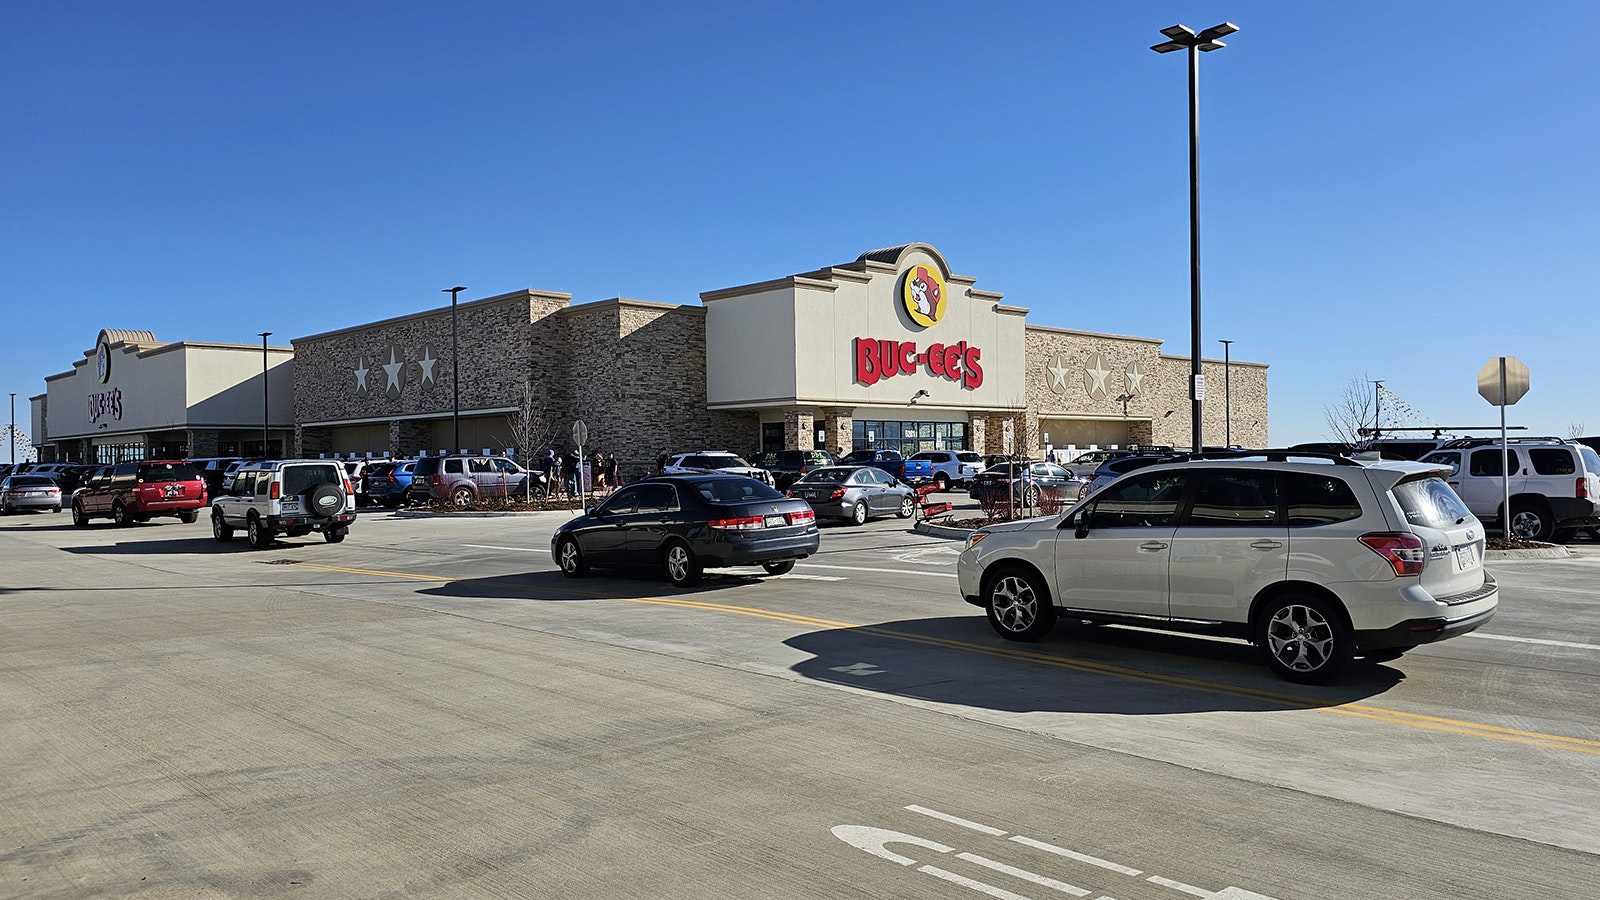 At 75,000 square feet, the Buc-ee's that opened Monday in Johnstown, Colo., about 55 miles south of Cheyenne off I-25 is the world's largest.